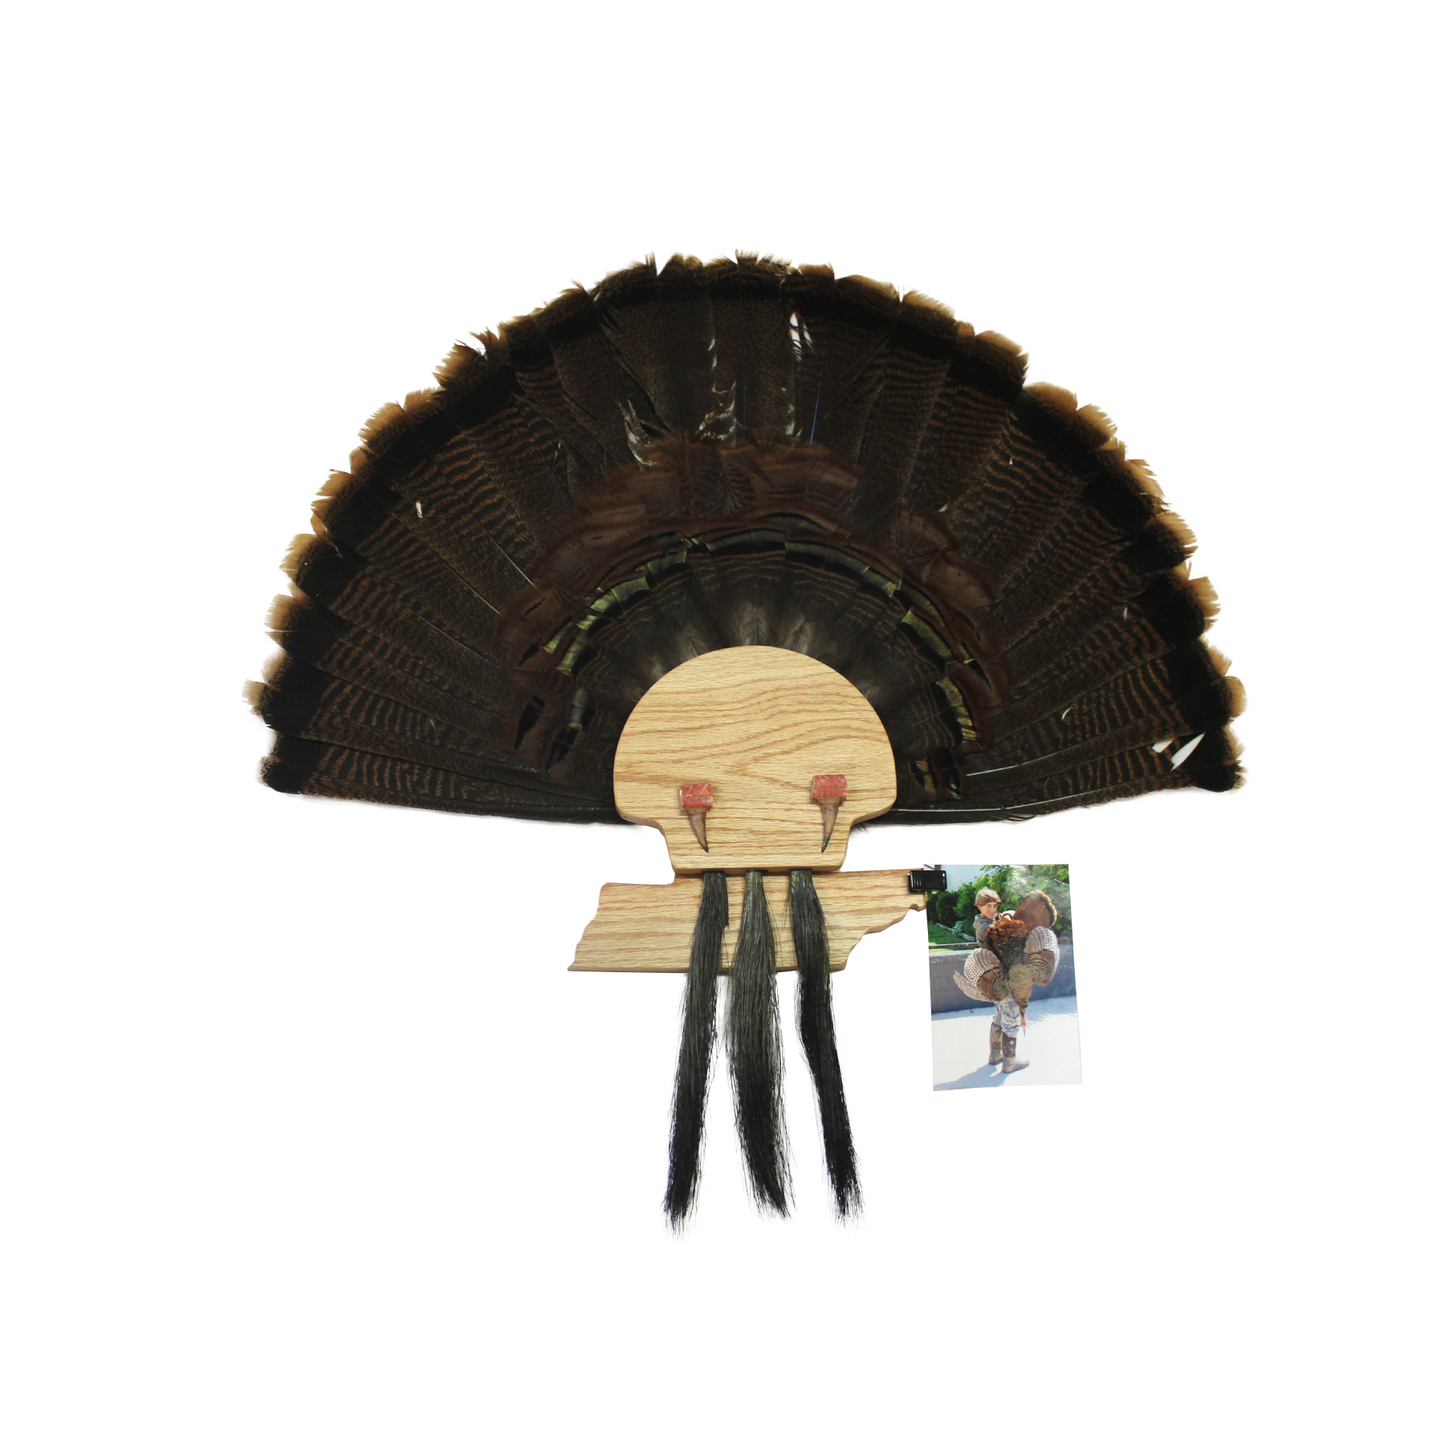 Turkey Mount Plaques with State - The Tool Store